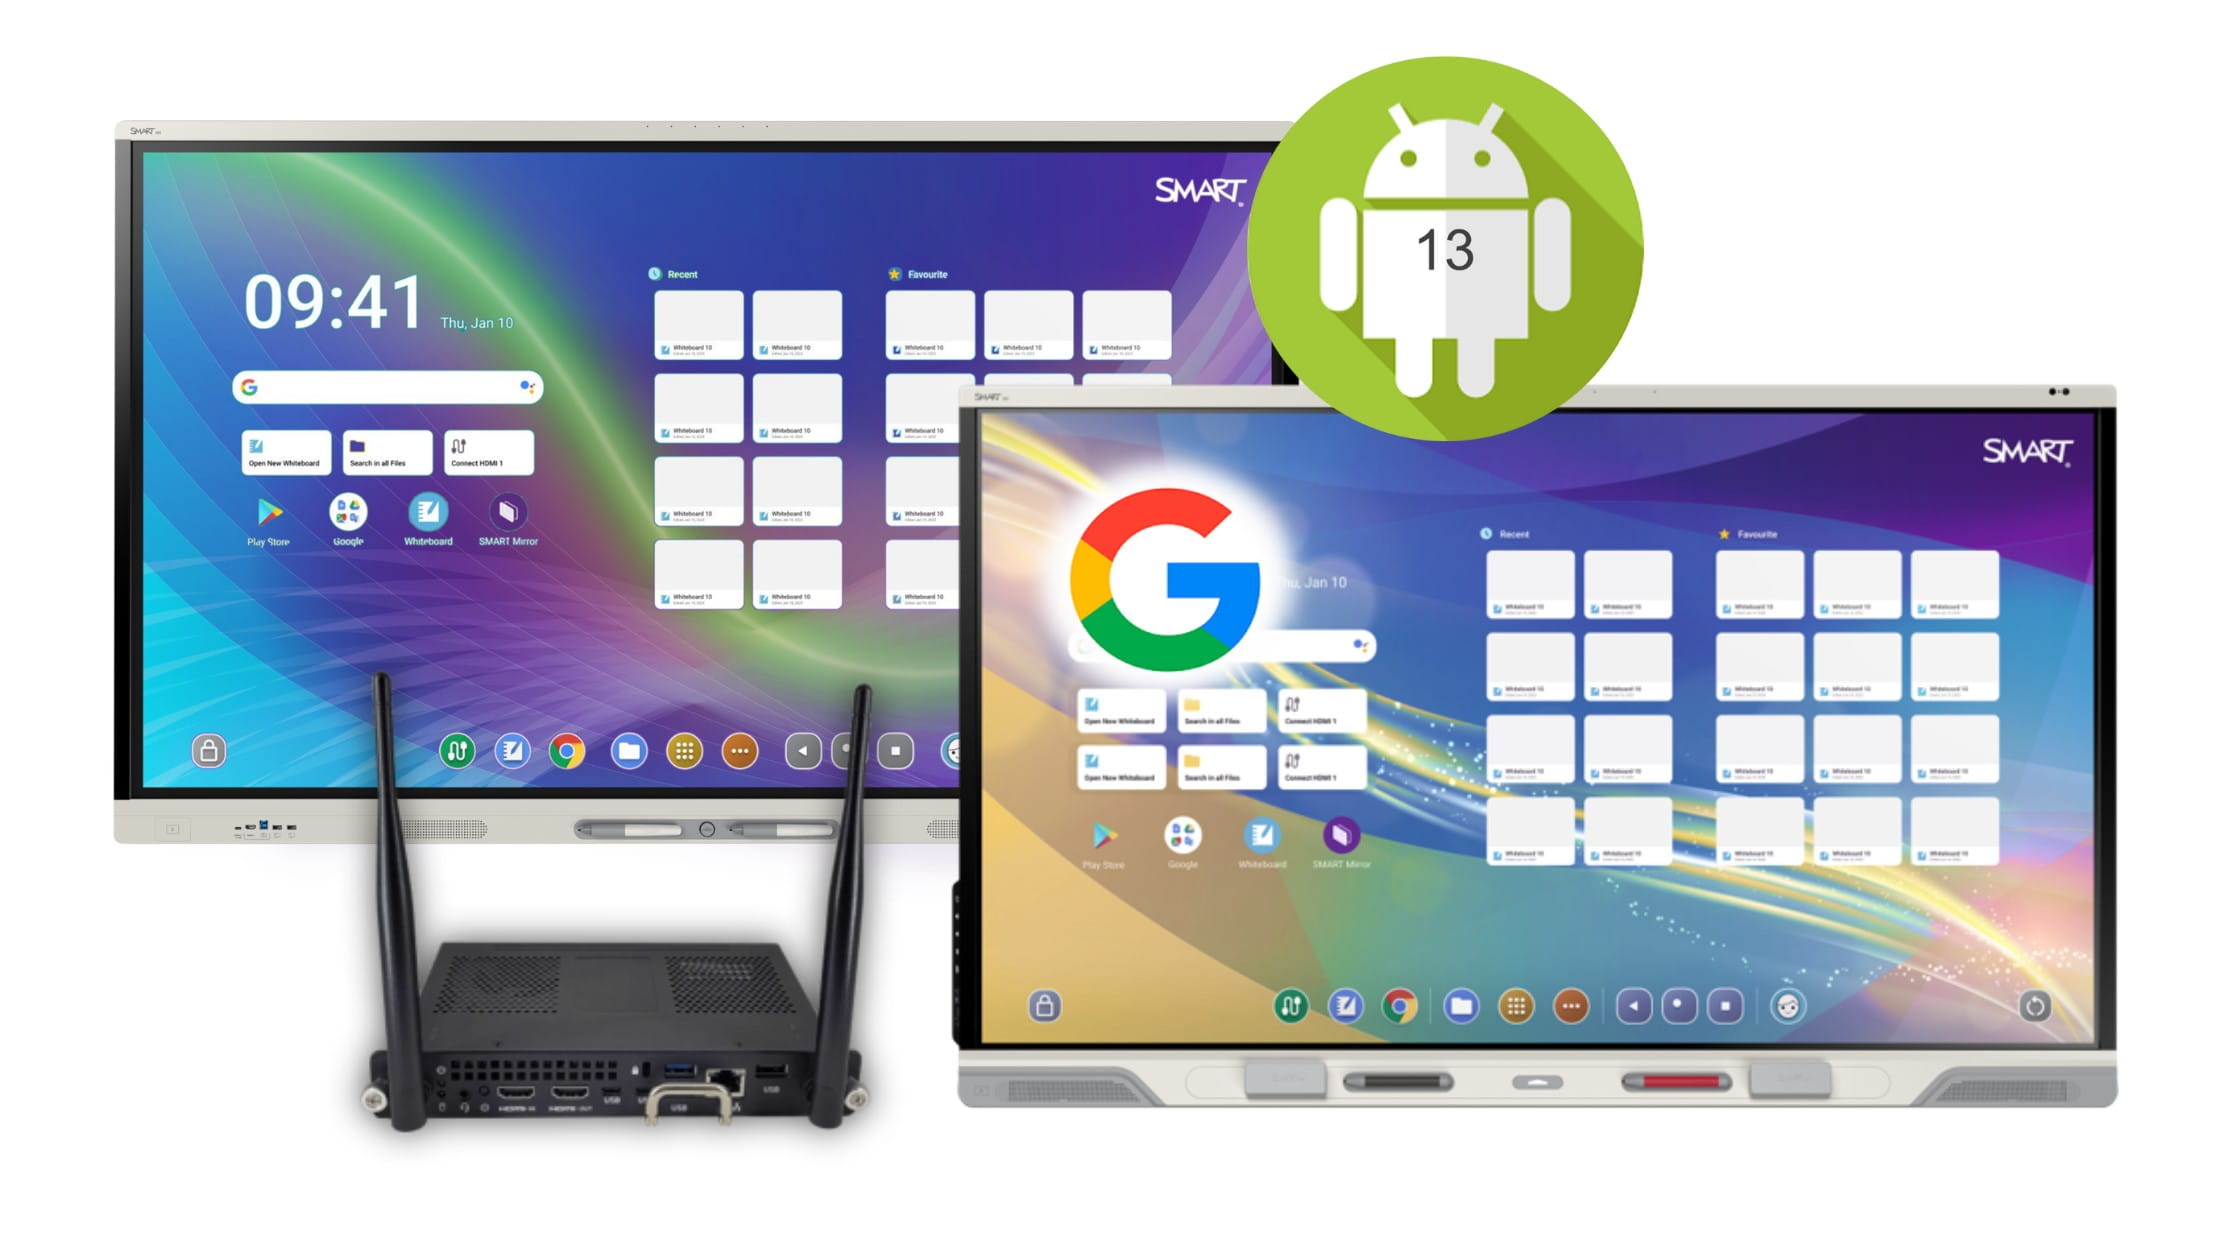 Two SMART interactive displays with Android and Google logos representing the embedded Google and Android experience.